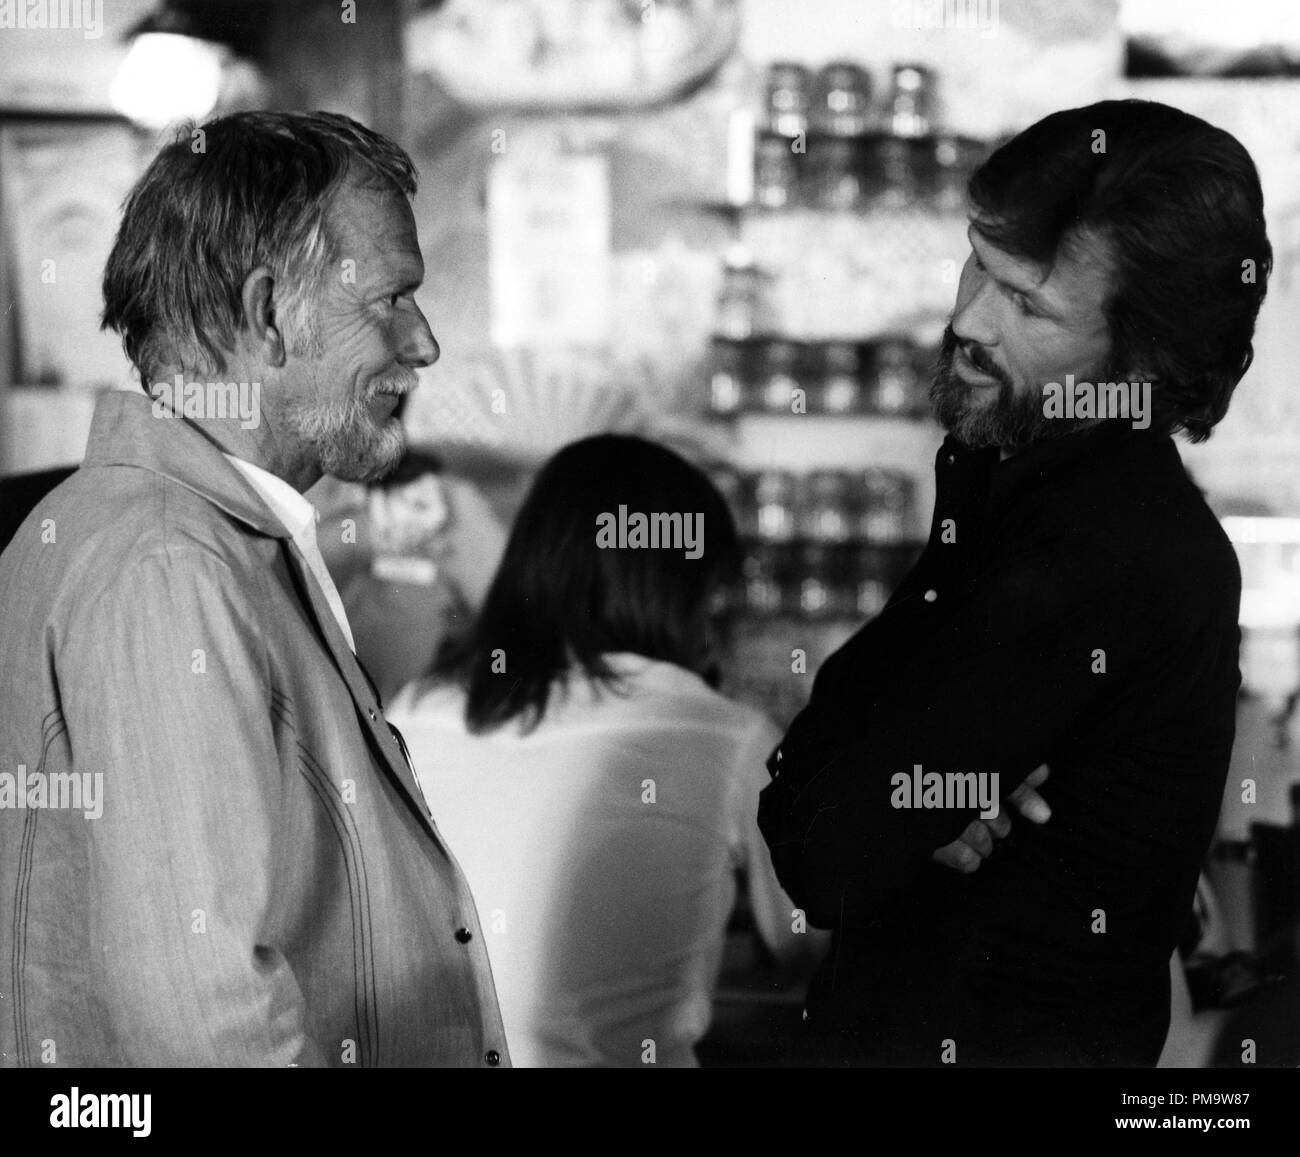 Studio Publicity Still from 'Convoy' Director Sam Peckinpah, Kris Kristofferson  © 1978 United Artists  All Rights Reserved   File Reference # 31720201THA  For Editorial Use Only Stock Photo